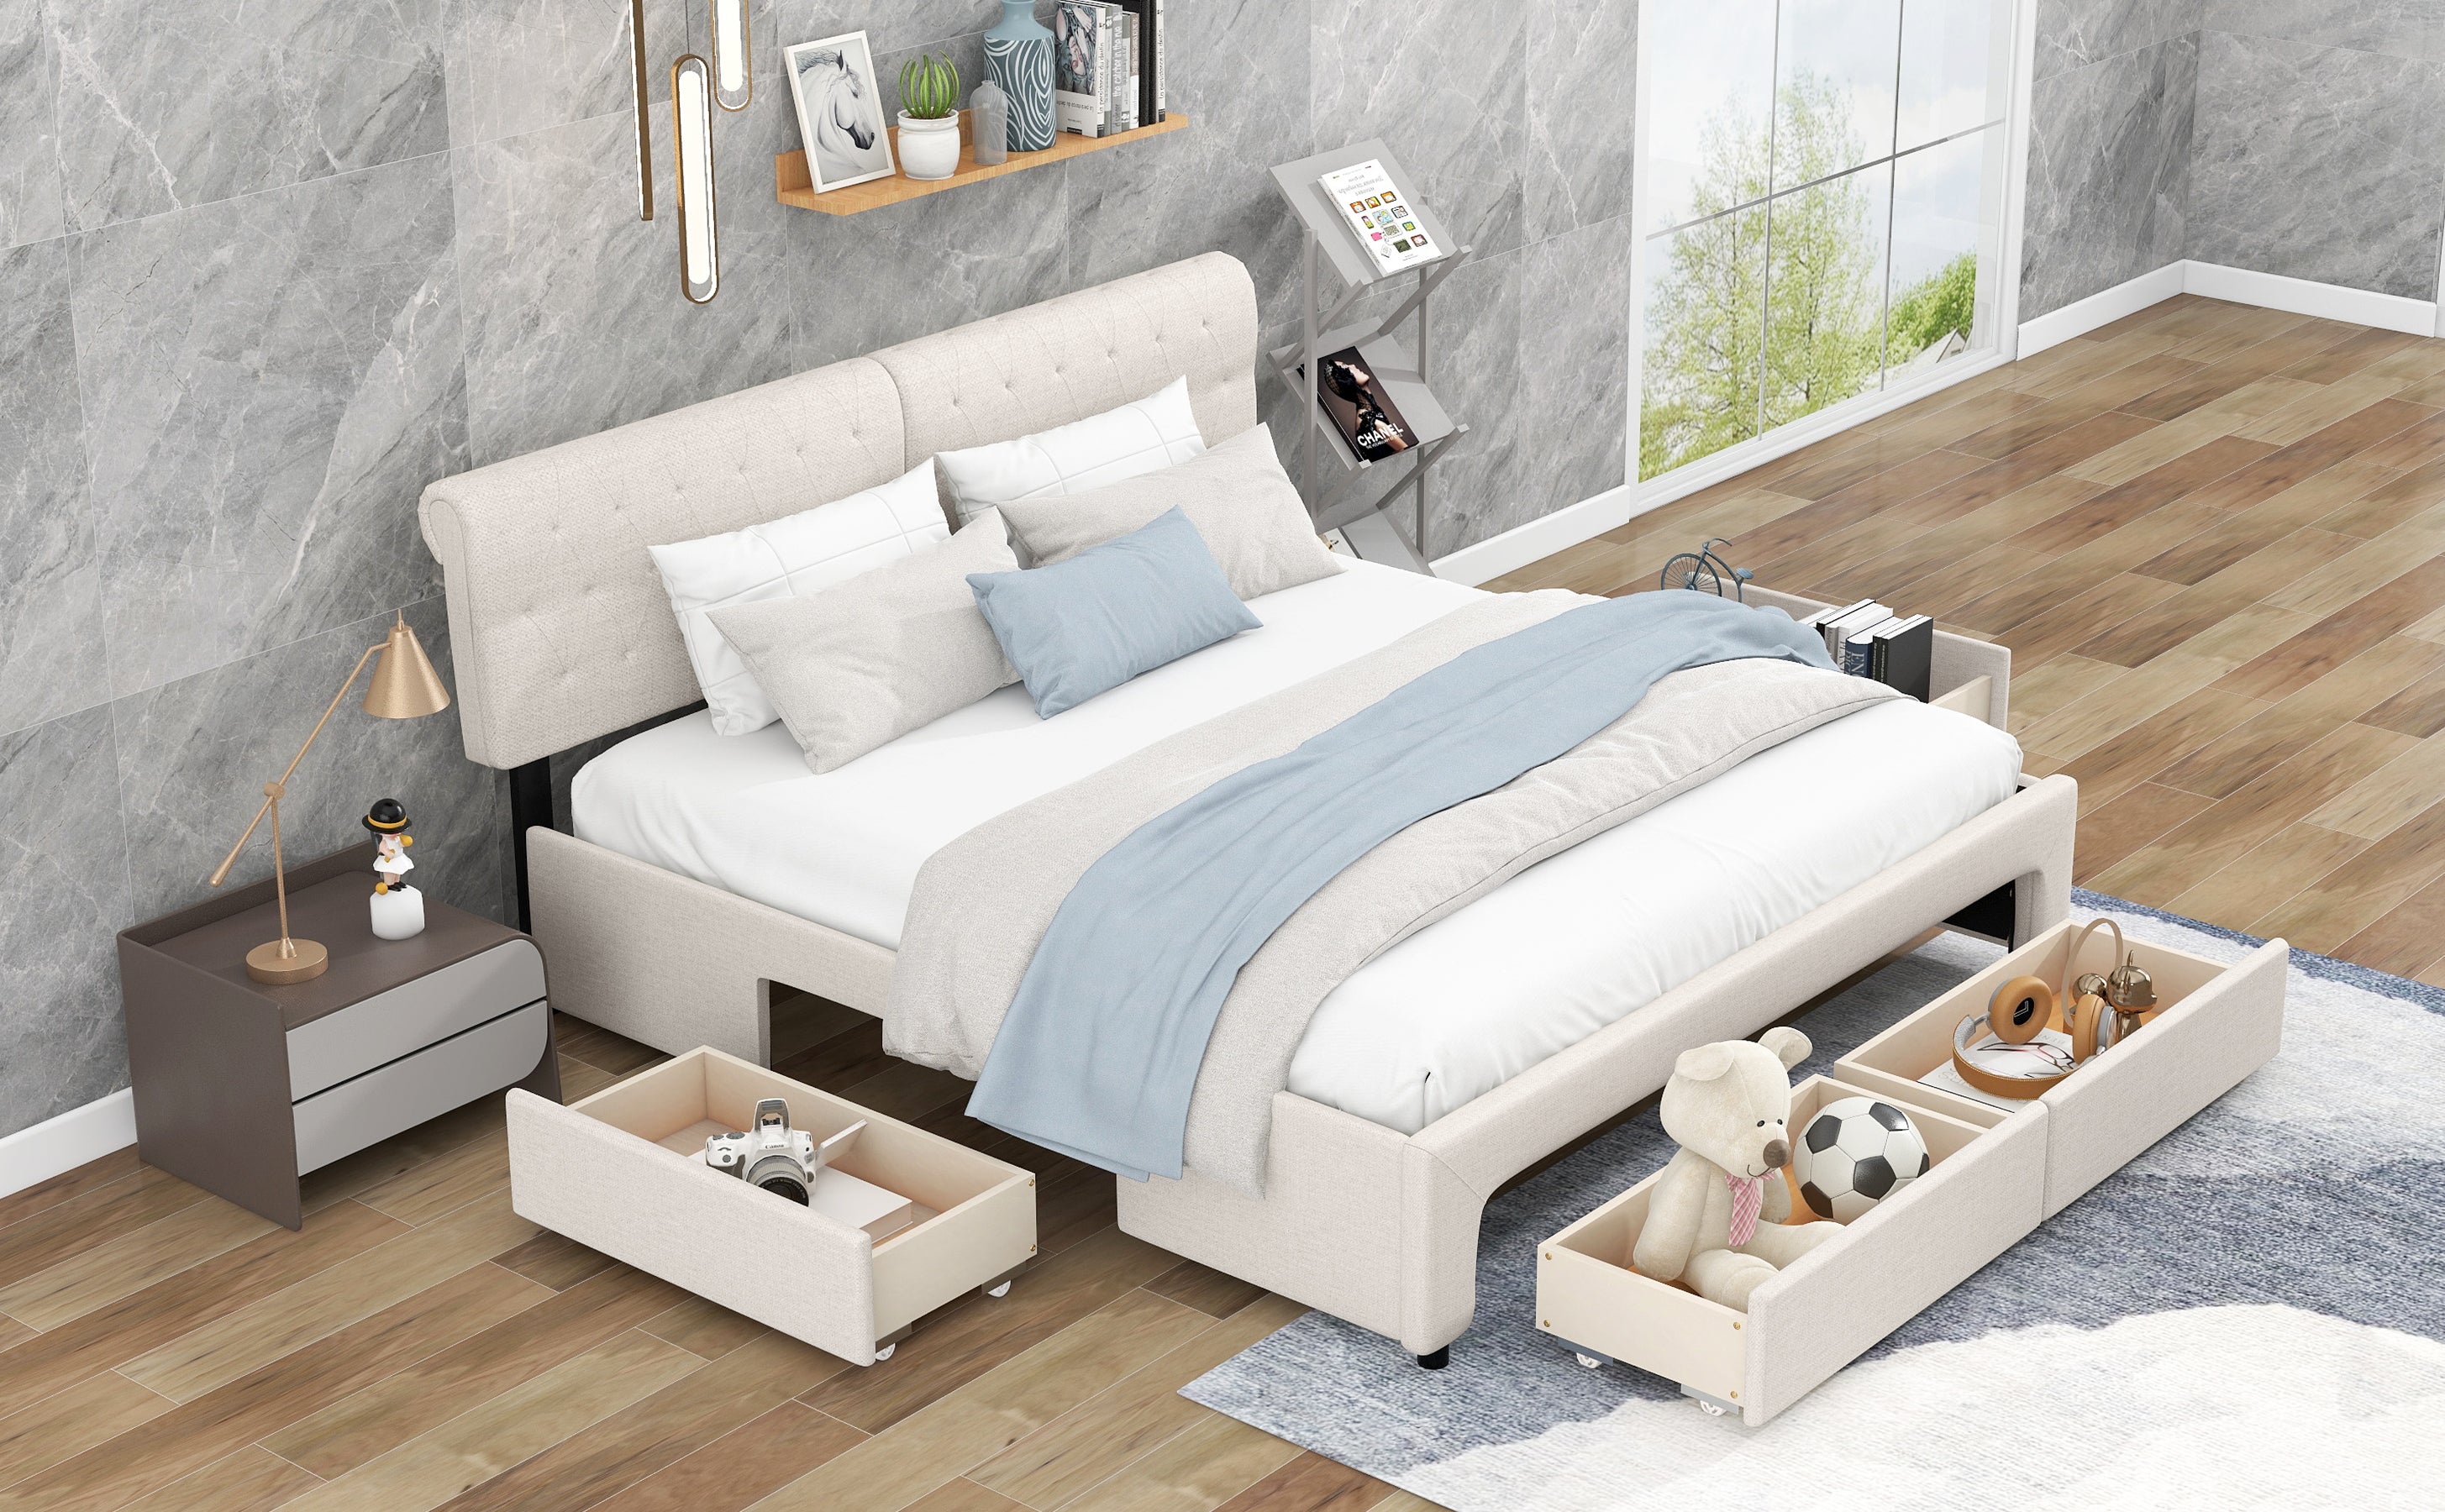 King Size Upholstery Platform Bed with Four Drawers - Beige